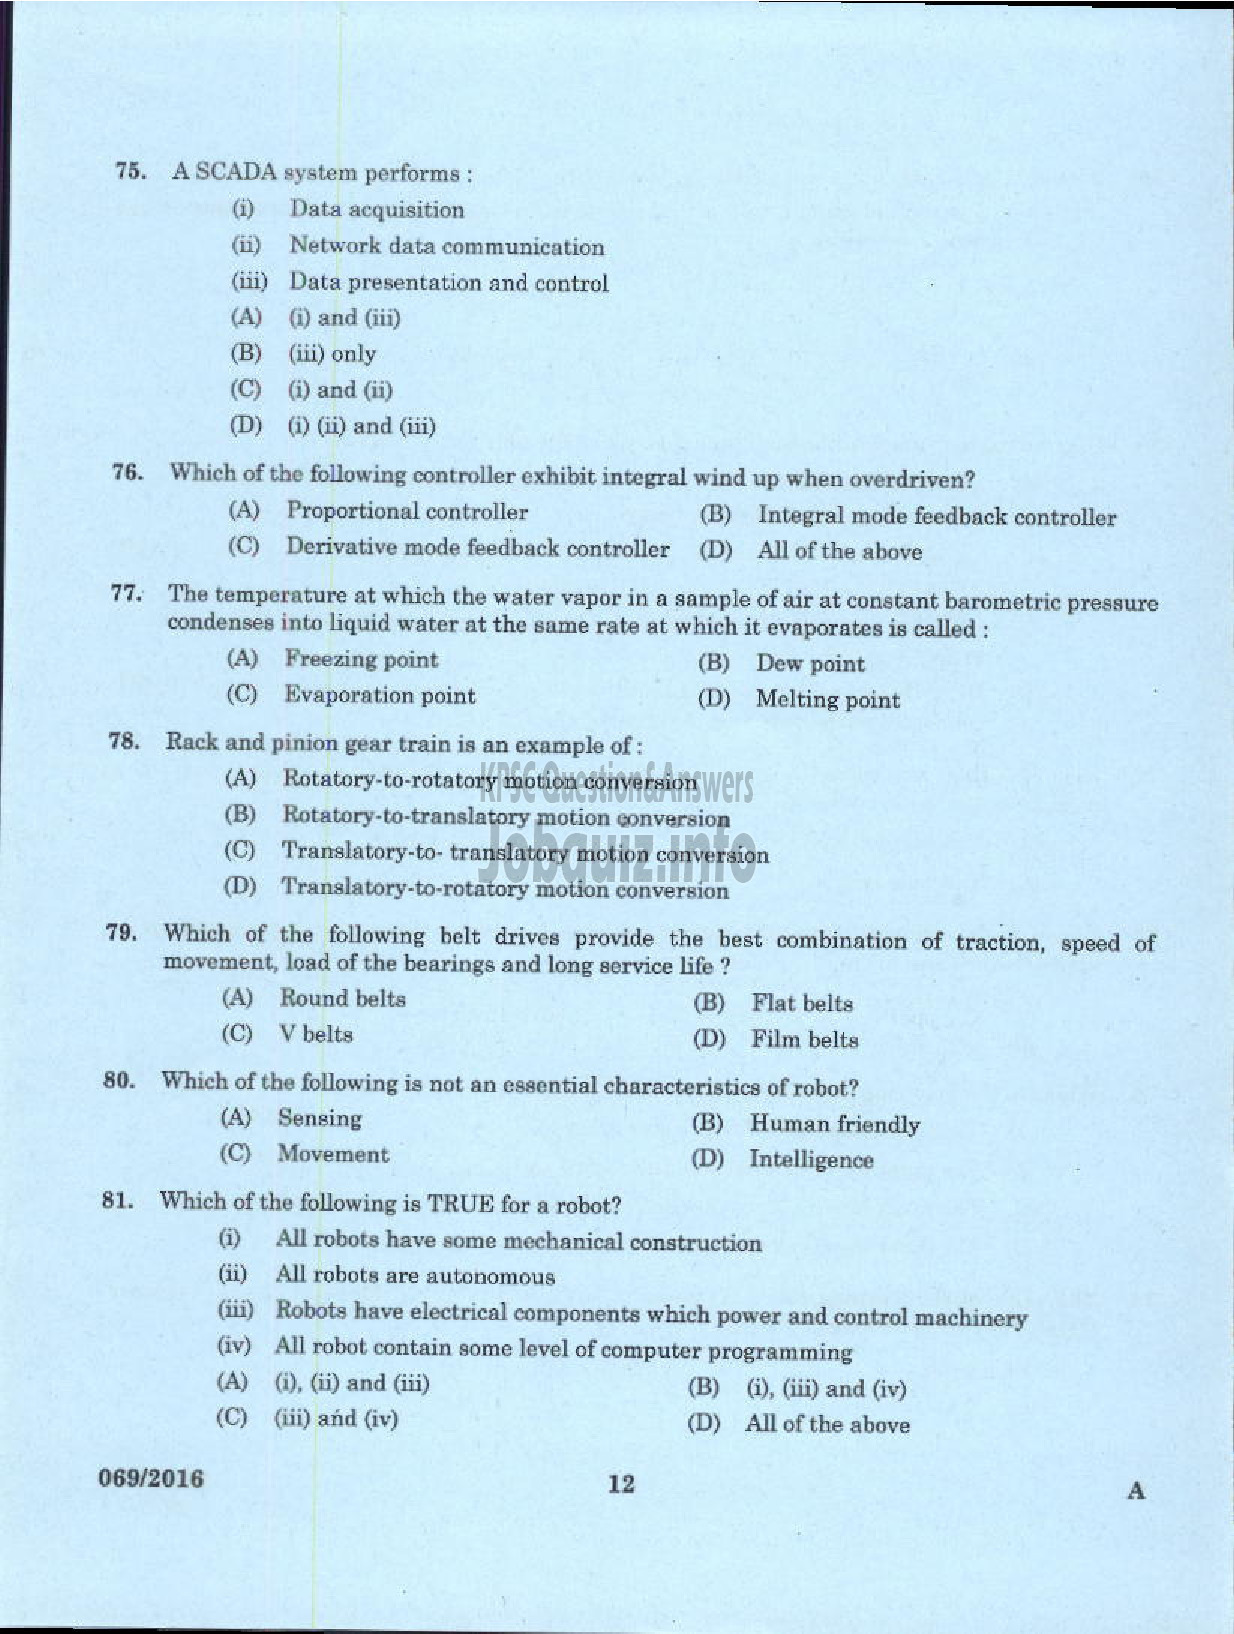 Kerala PSC Question Paper - LECTURER IN ELECTRONICS AND INSTRUMENTATION POLYTECHNICS TECHNICAL EDUCATION-10